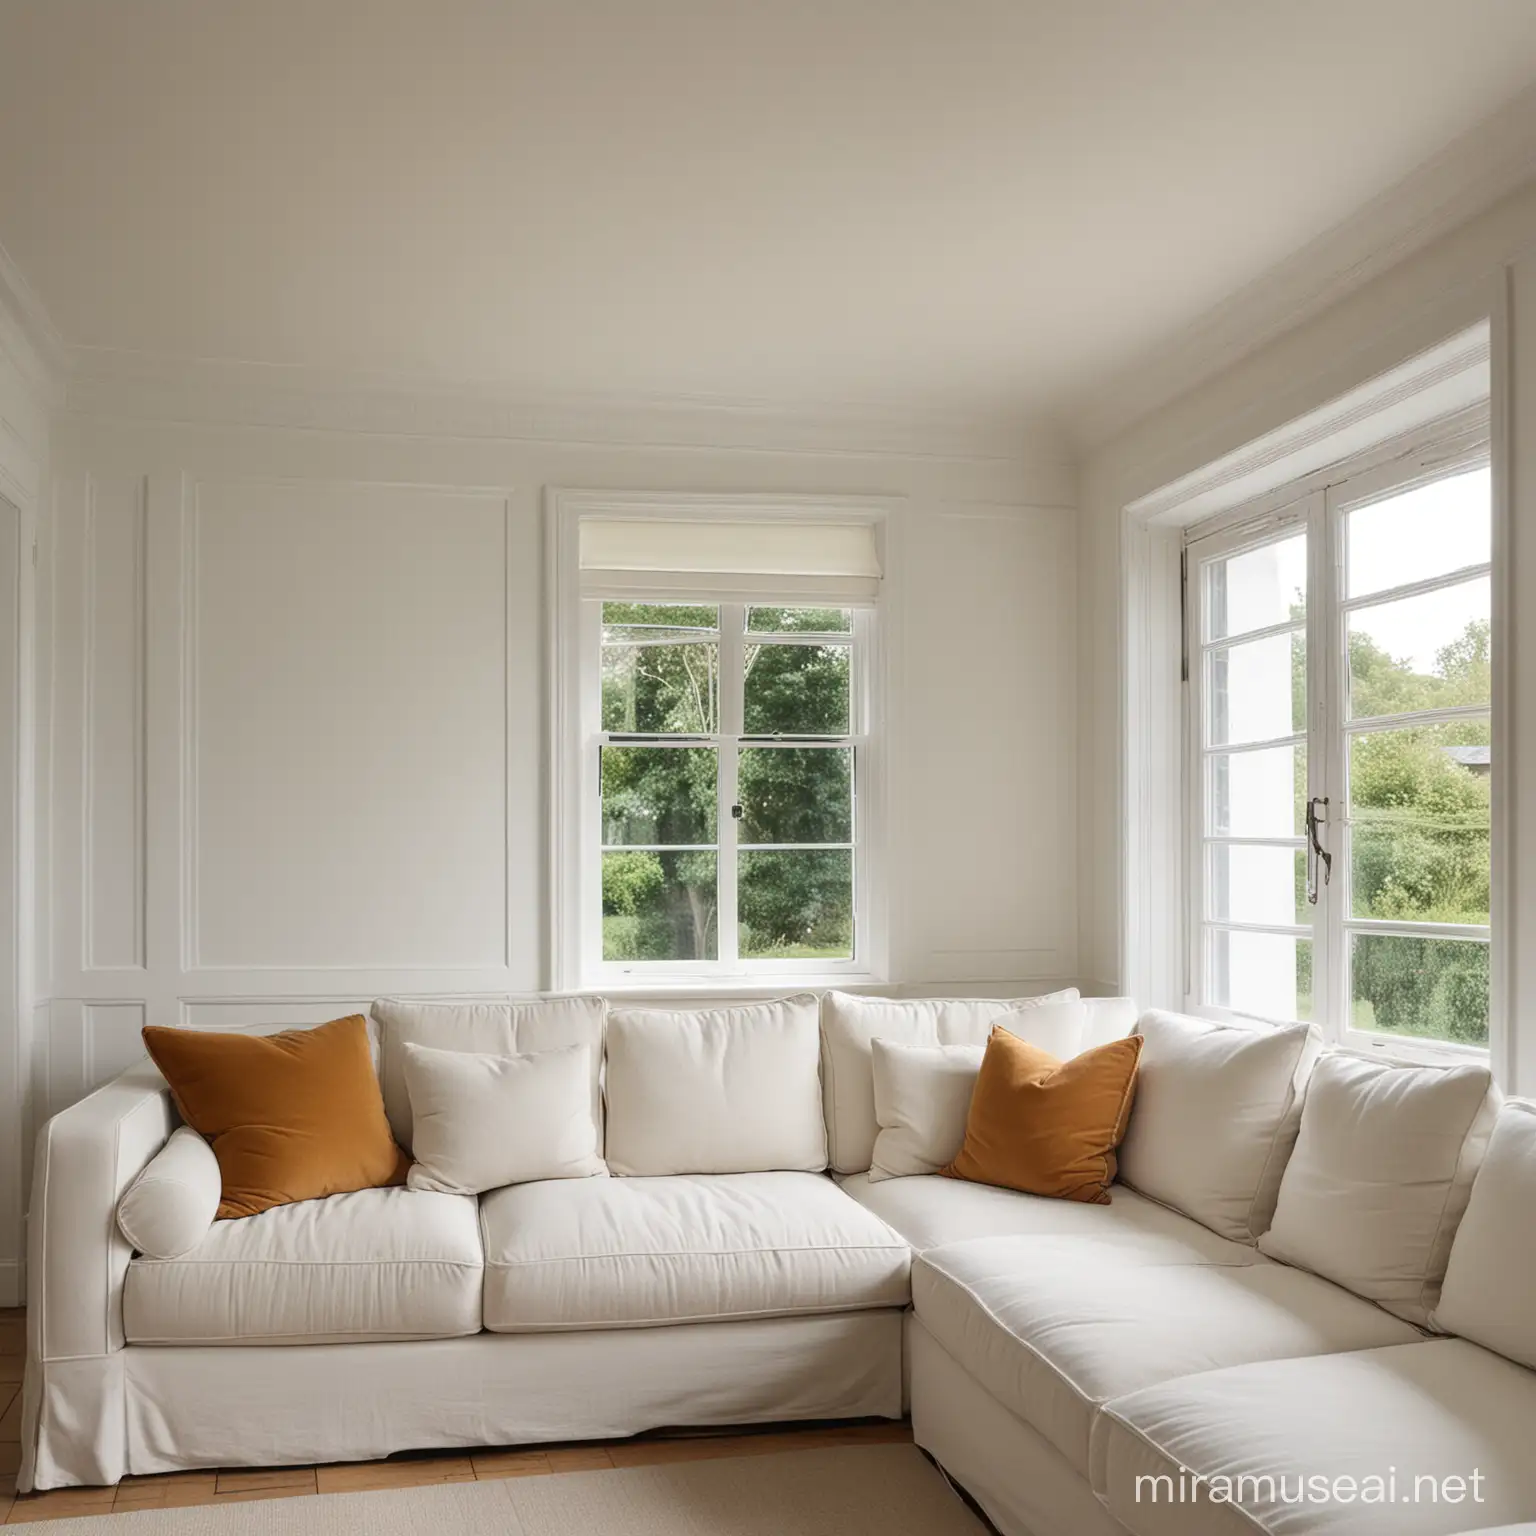 looking into the corner of a living room. large plain white panelled walls. sofa. window to left.